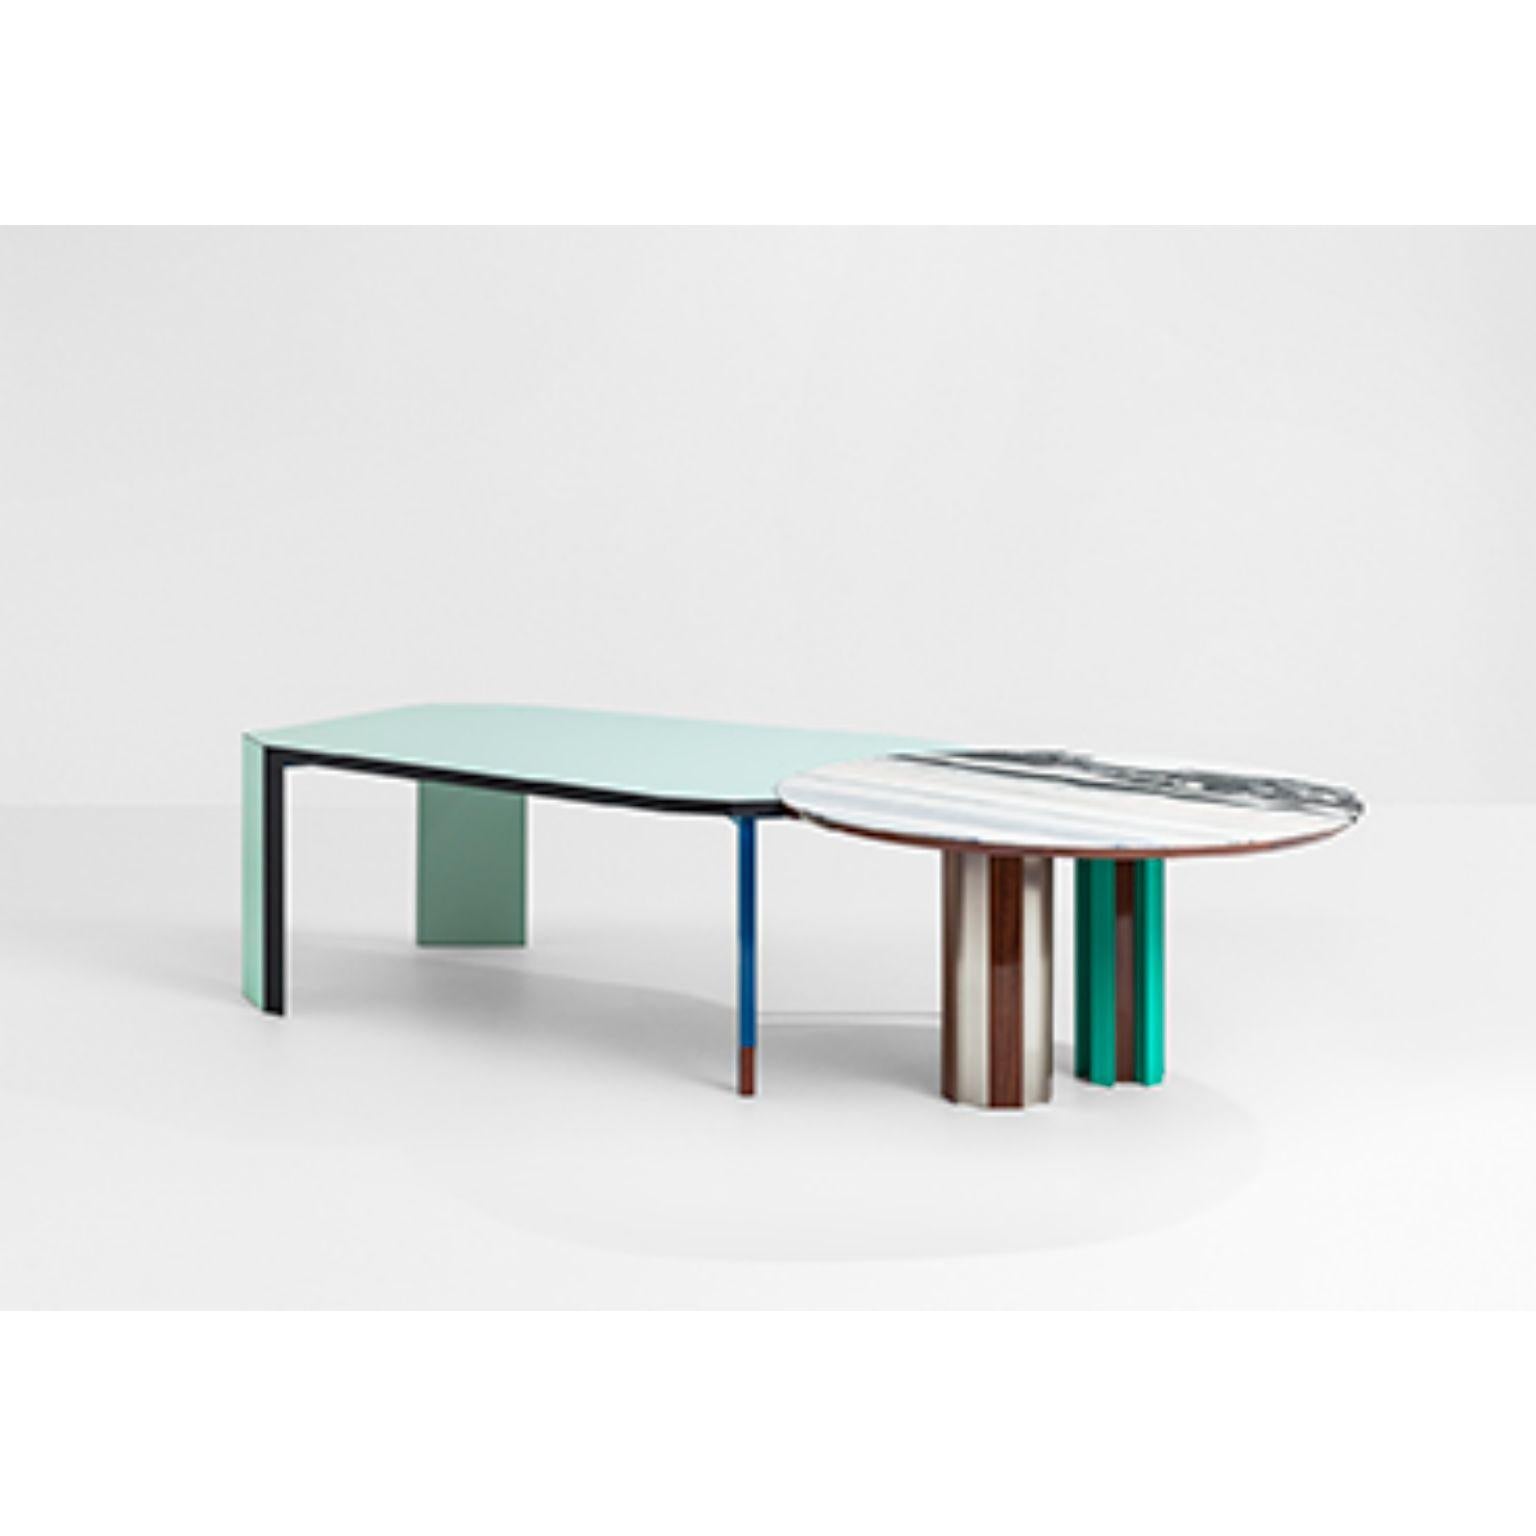 Duale table by SEM
Dimensions: W 310,5 x D 145,0 x H 75,0 cm
Round top Ø145,0 cm
Poligonal top W 186,0 x D 128,0 cm
Material:Round top - polished Lasa marble or Panda marble, Polygonal top - laminated MDF in light green colour, Legs - polished